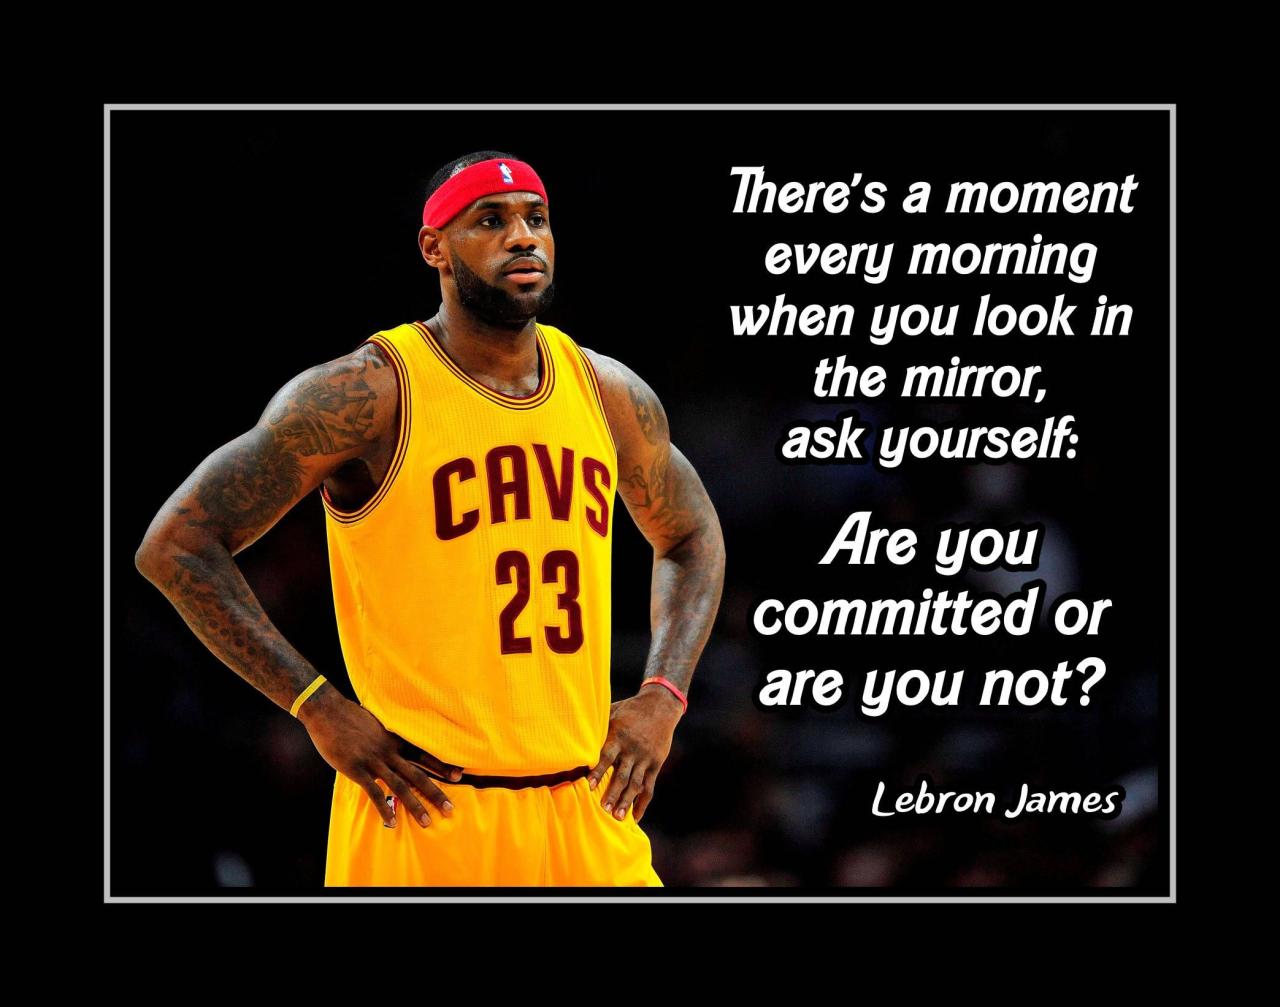 How Did Lebron James Inspire Others?